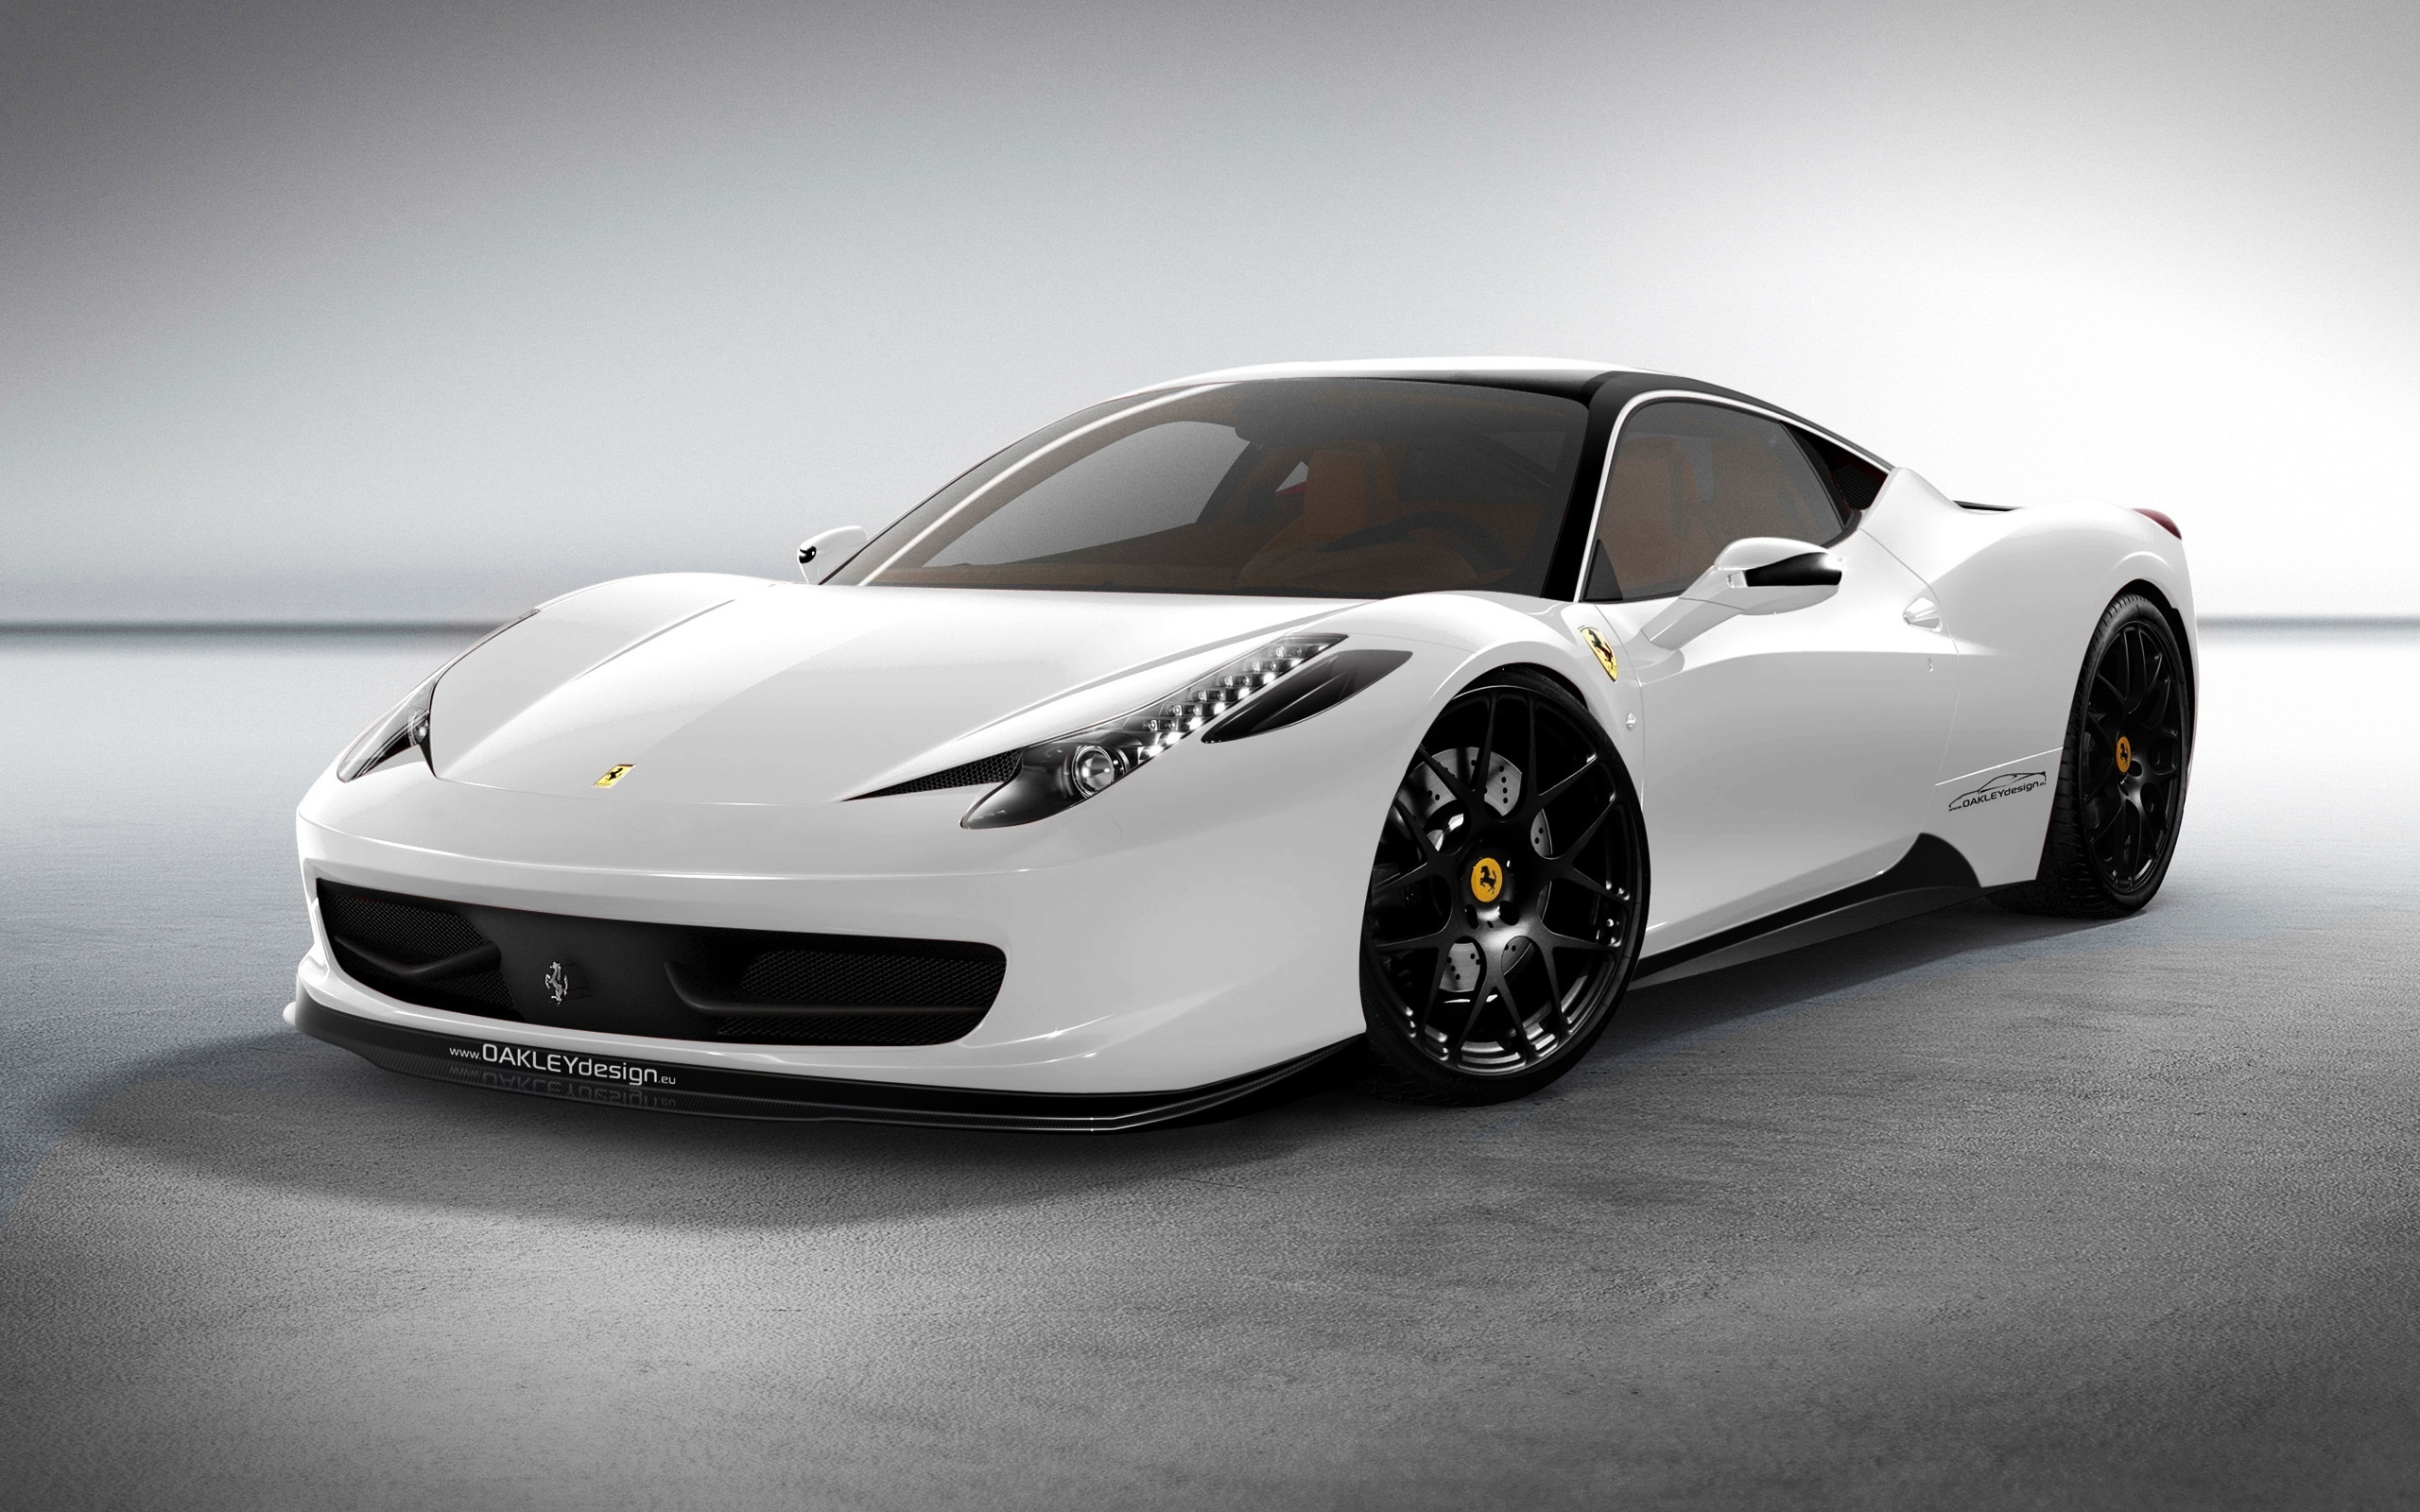 White Ferrari 458 sports car - a sleek and powerful vehicle, perfect for speed enthusiasts.